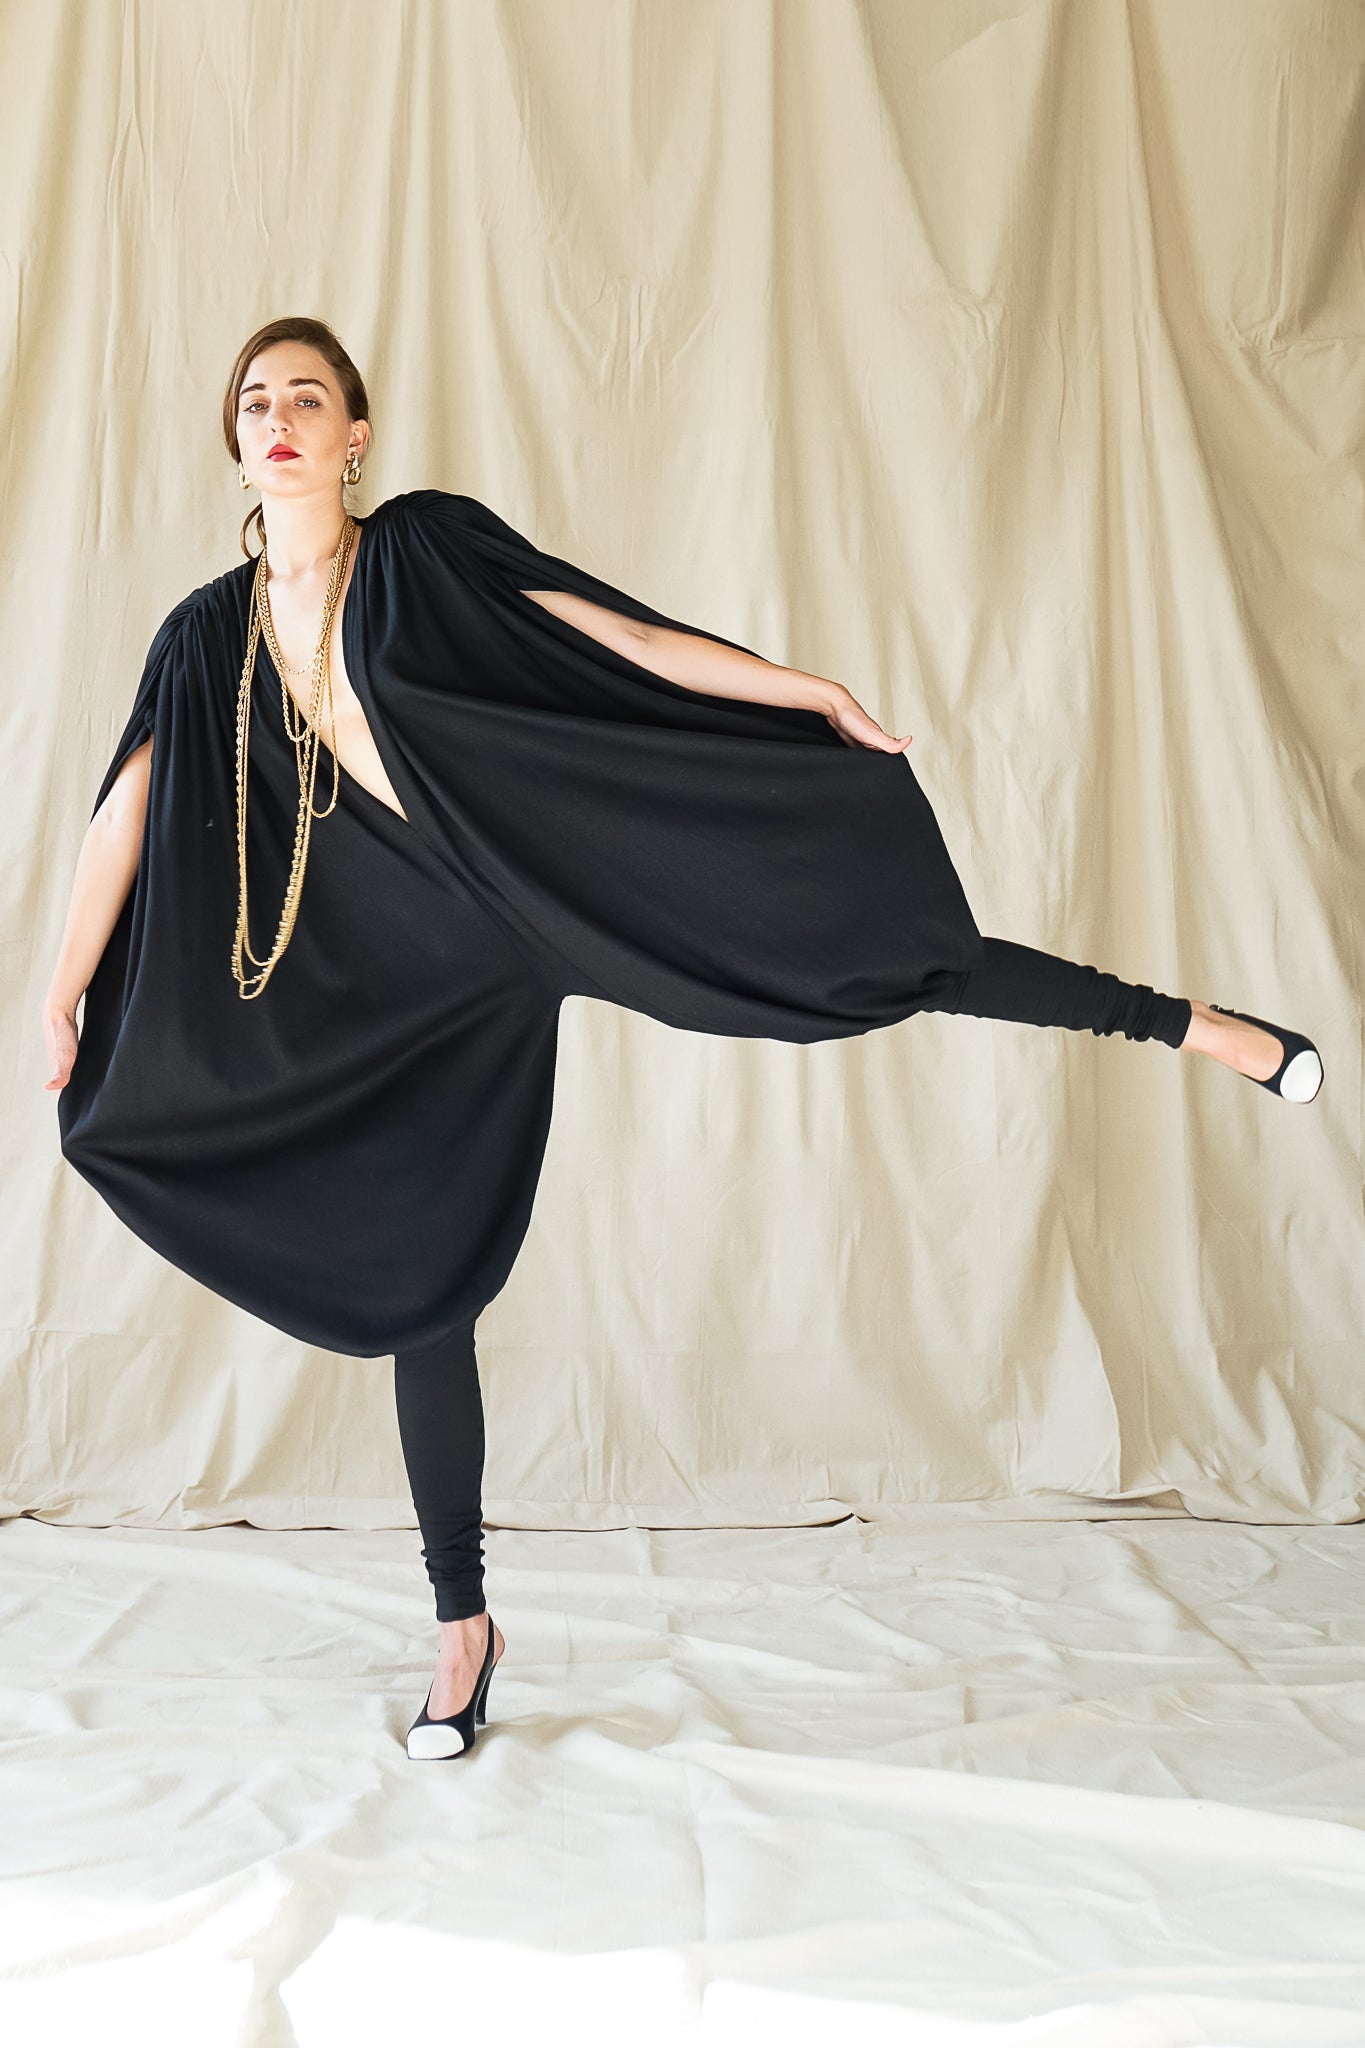 Recess Vintage Consignment Girl wearing black Norma Kamali iconic 80s bubble jersey knit jumpsuit